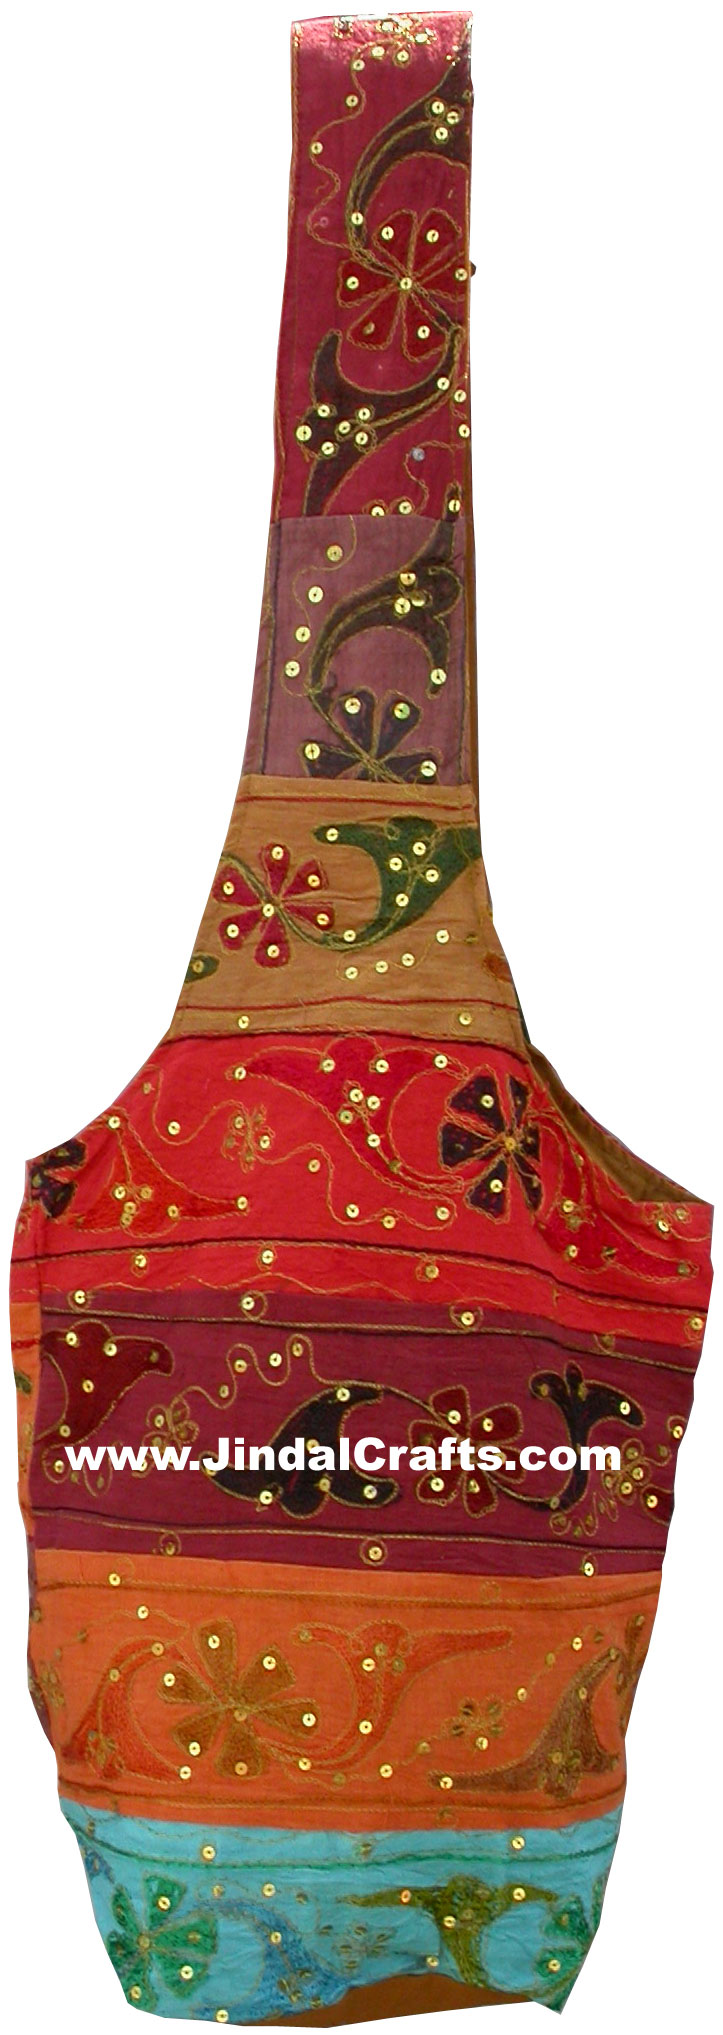 Colourful Hand Embroidered Sequin Handbag from India 100 % Cotton Fabric Art